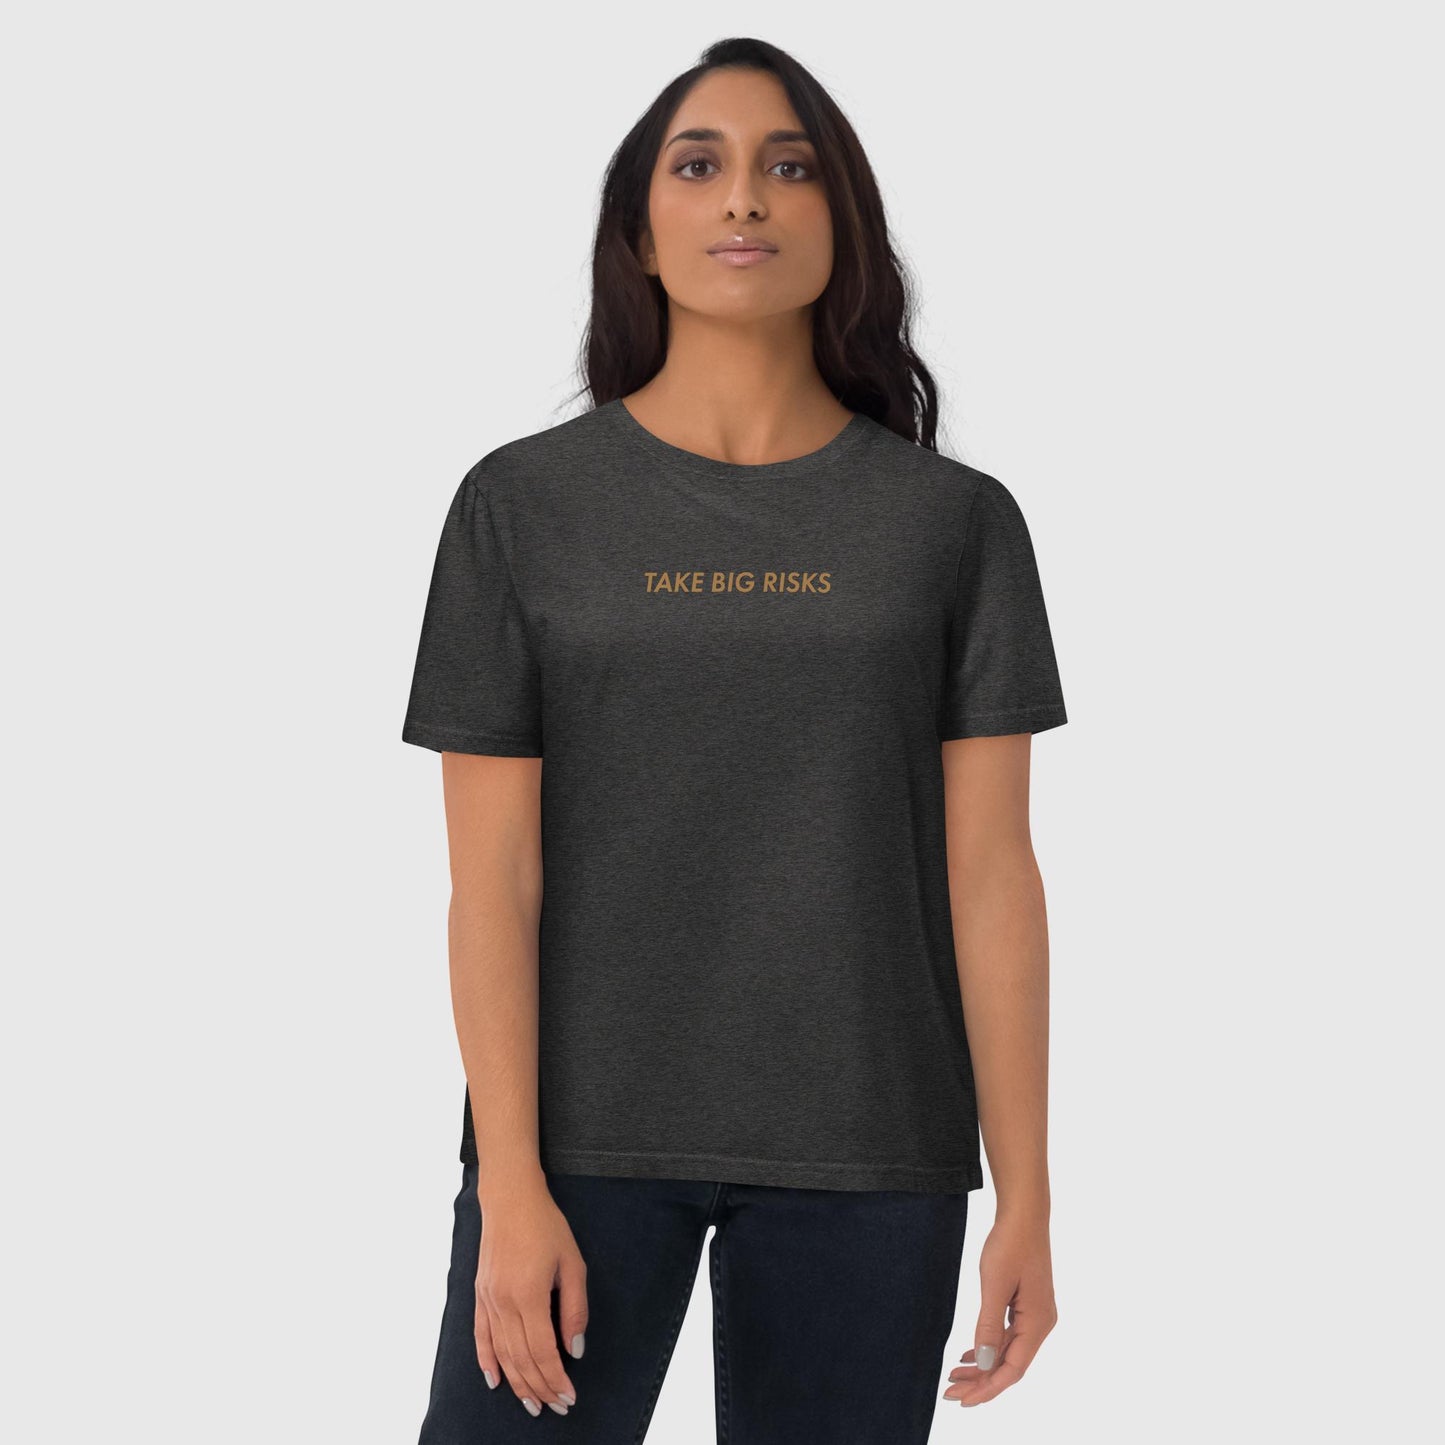 Women's dark heather gray oversized organic cotton t-shirt that features Bill Gates' quote on success, "Take Big Risks." 